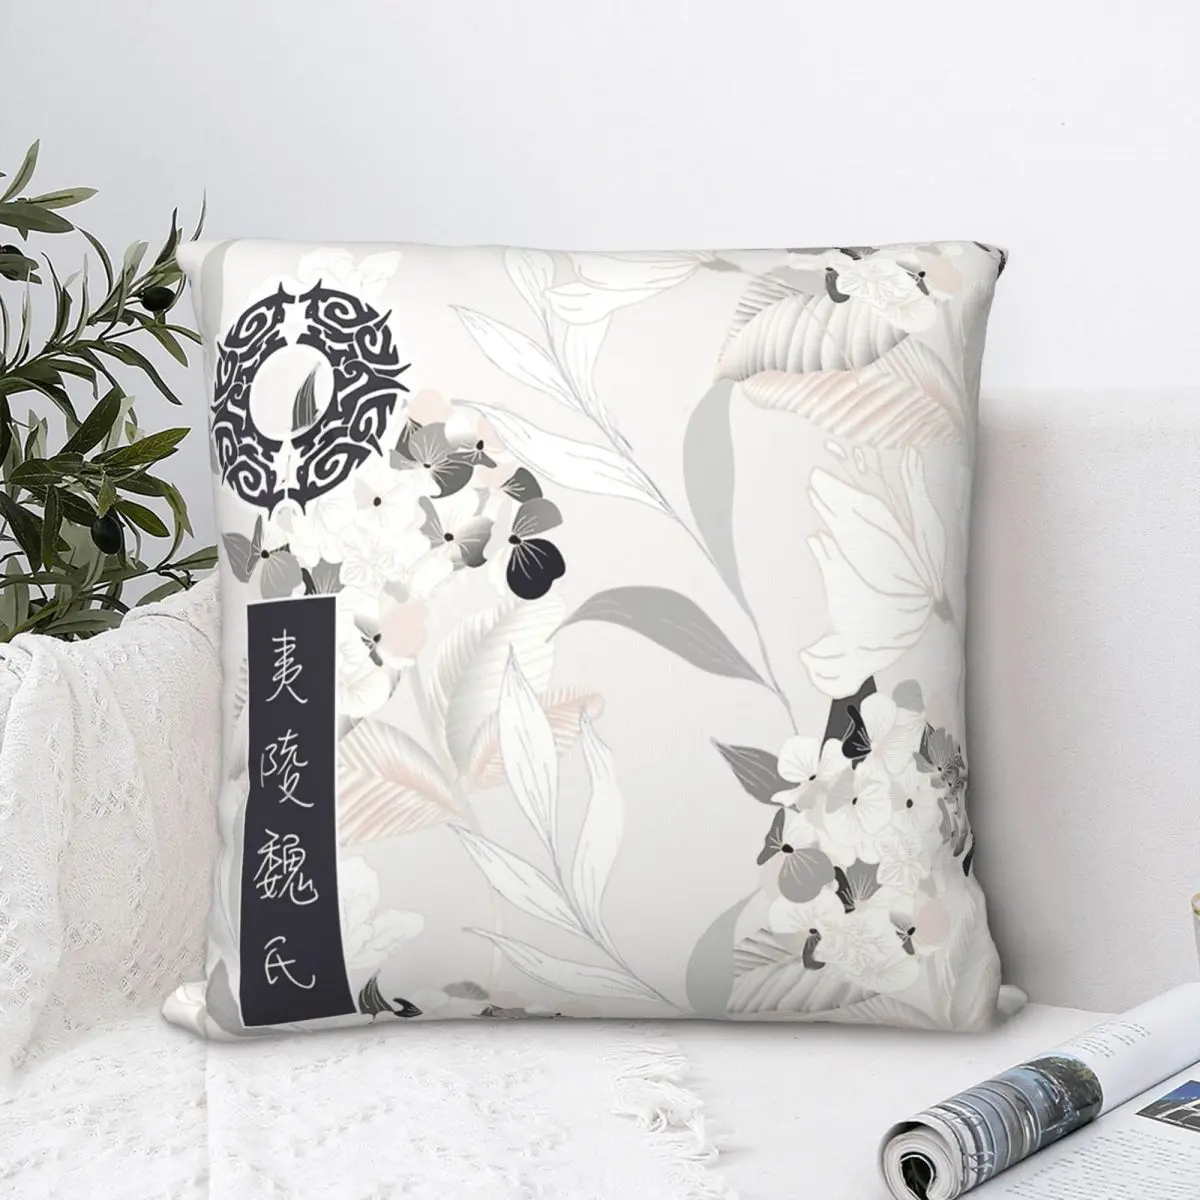 

Yiling Wei Sect The Untamed Sympathy For The Dead Throw Pillow Case Cushion Home Sofa Chair Print Decorative Hug Pillowcase